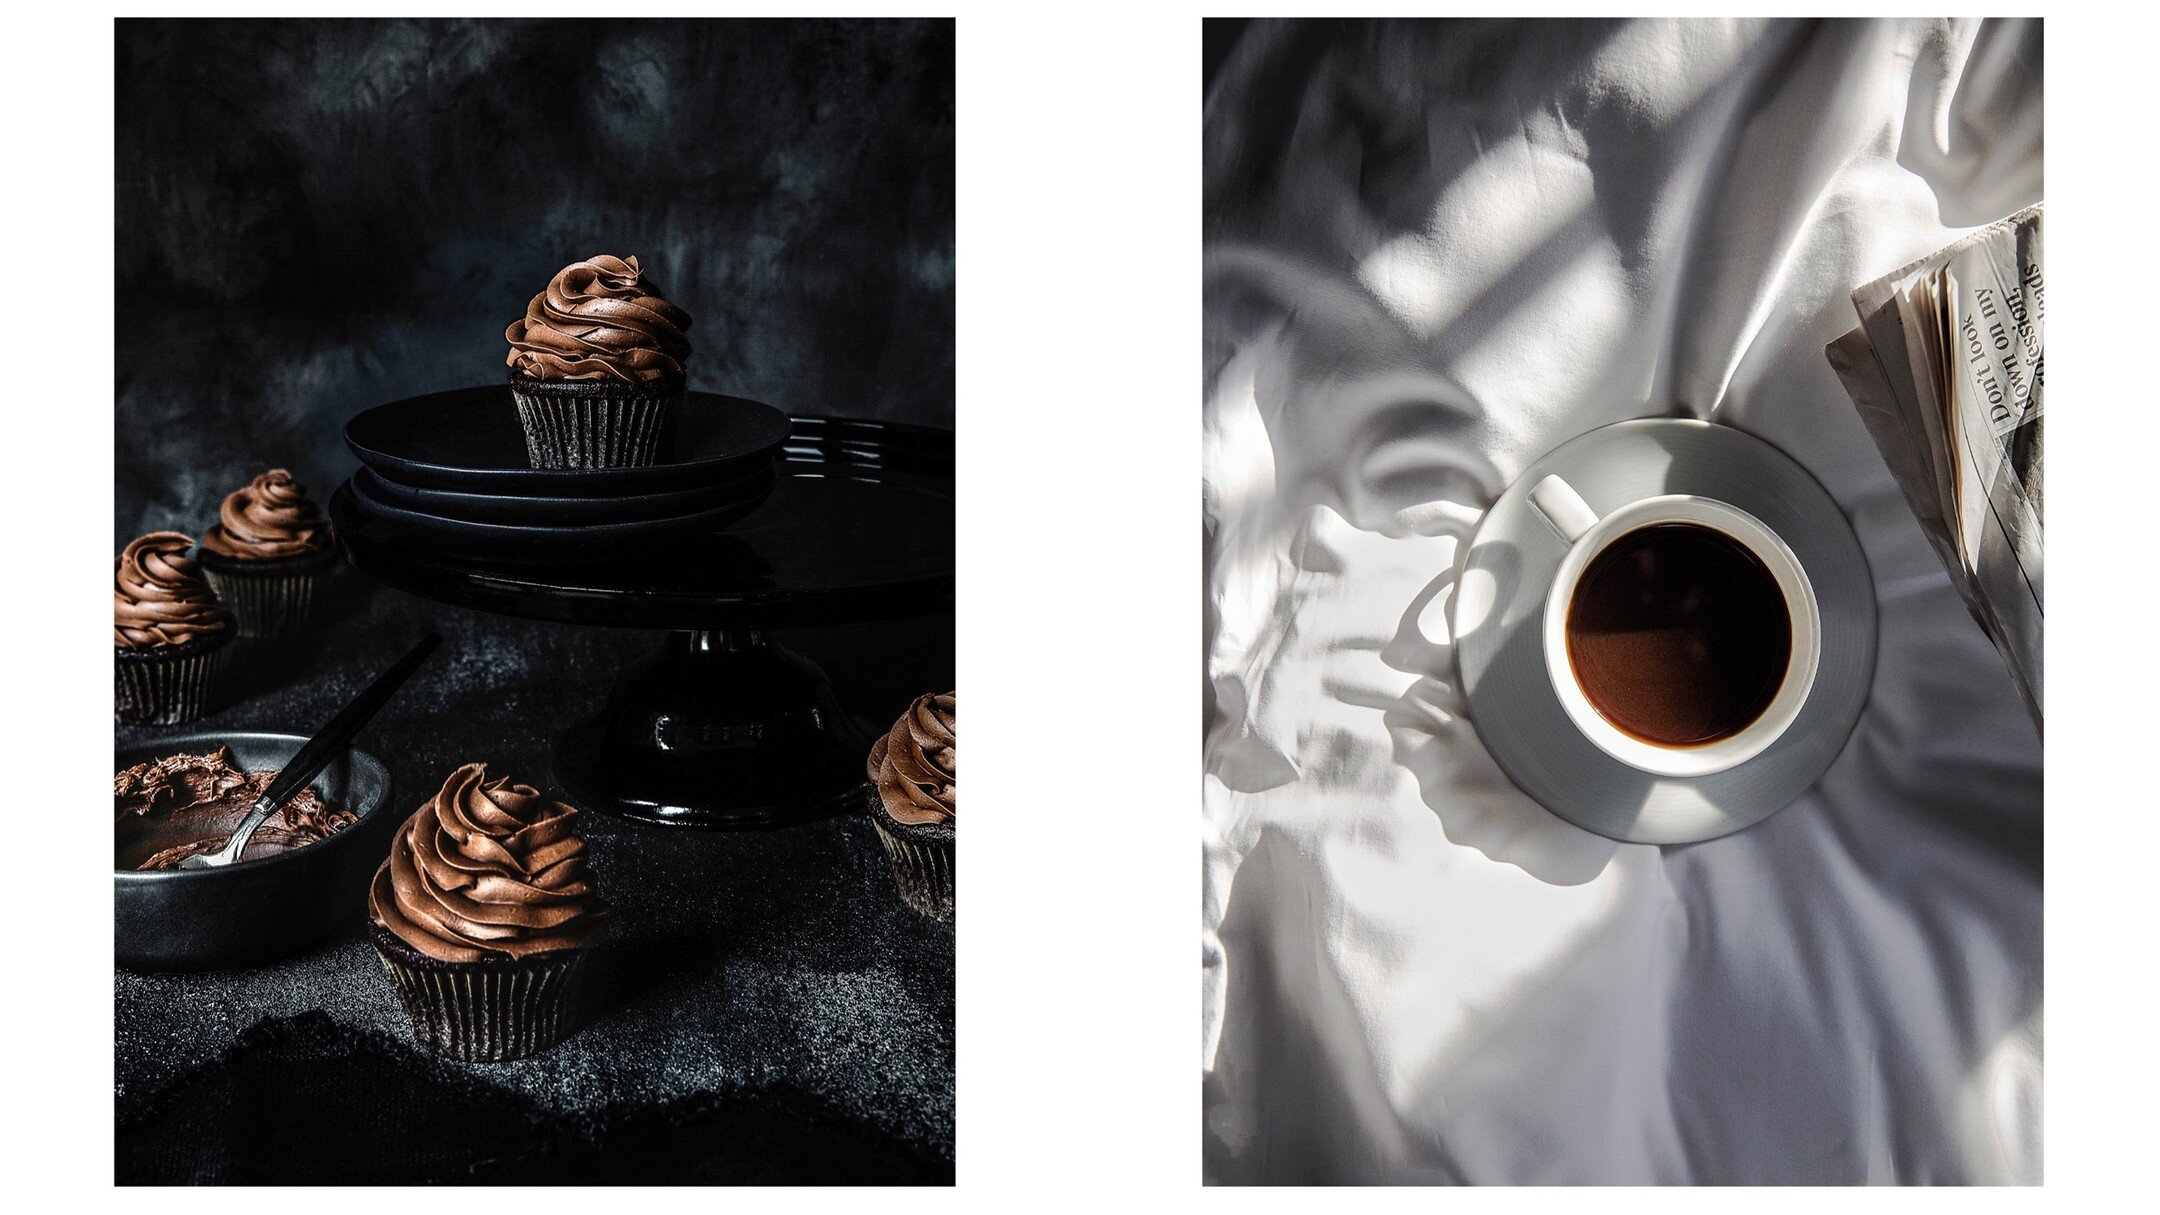 Black and white; coffee and chocolate. Good things that go together. Come play with us at our upcoming workshop in Victoria BC on April 20-21 and learn how to nail down your signature style and build a portfolio that truly represents YOU!
.
.
.
#blac